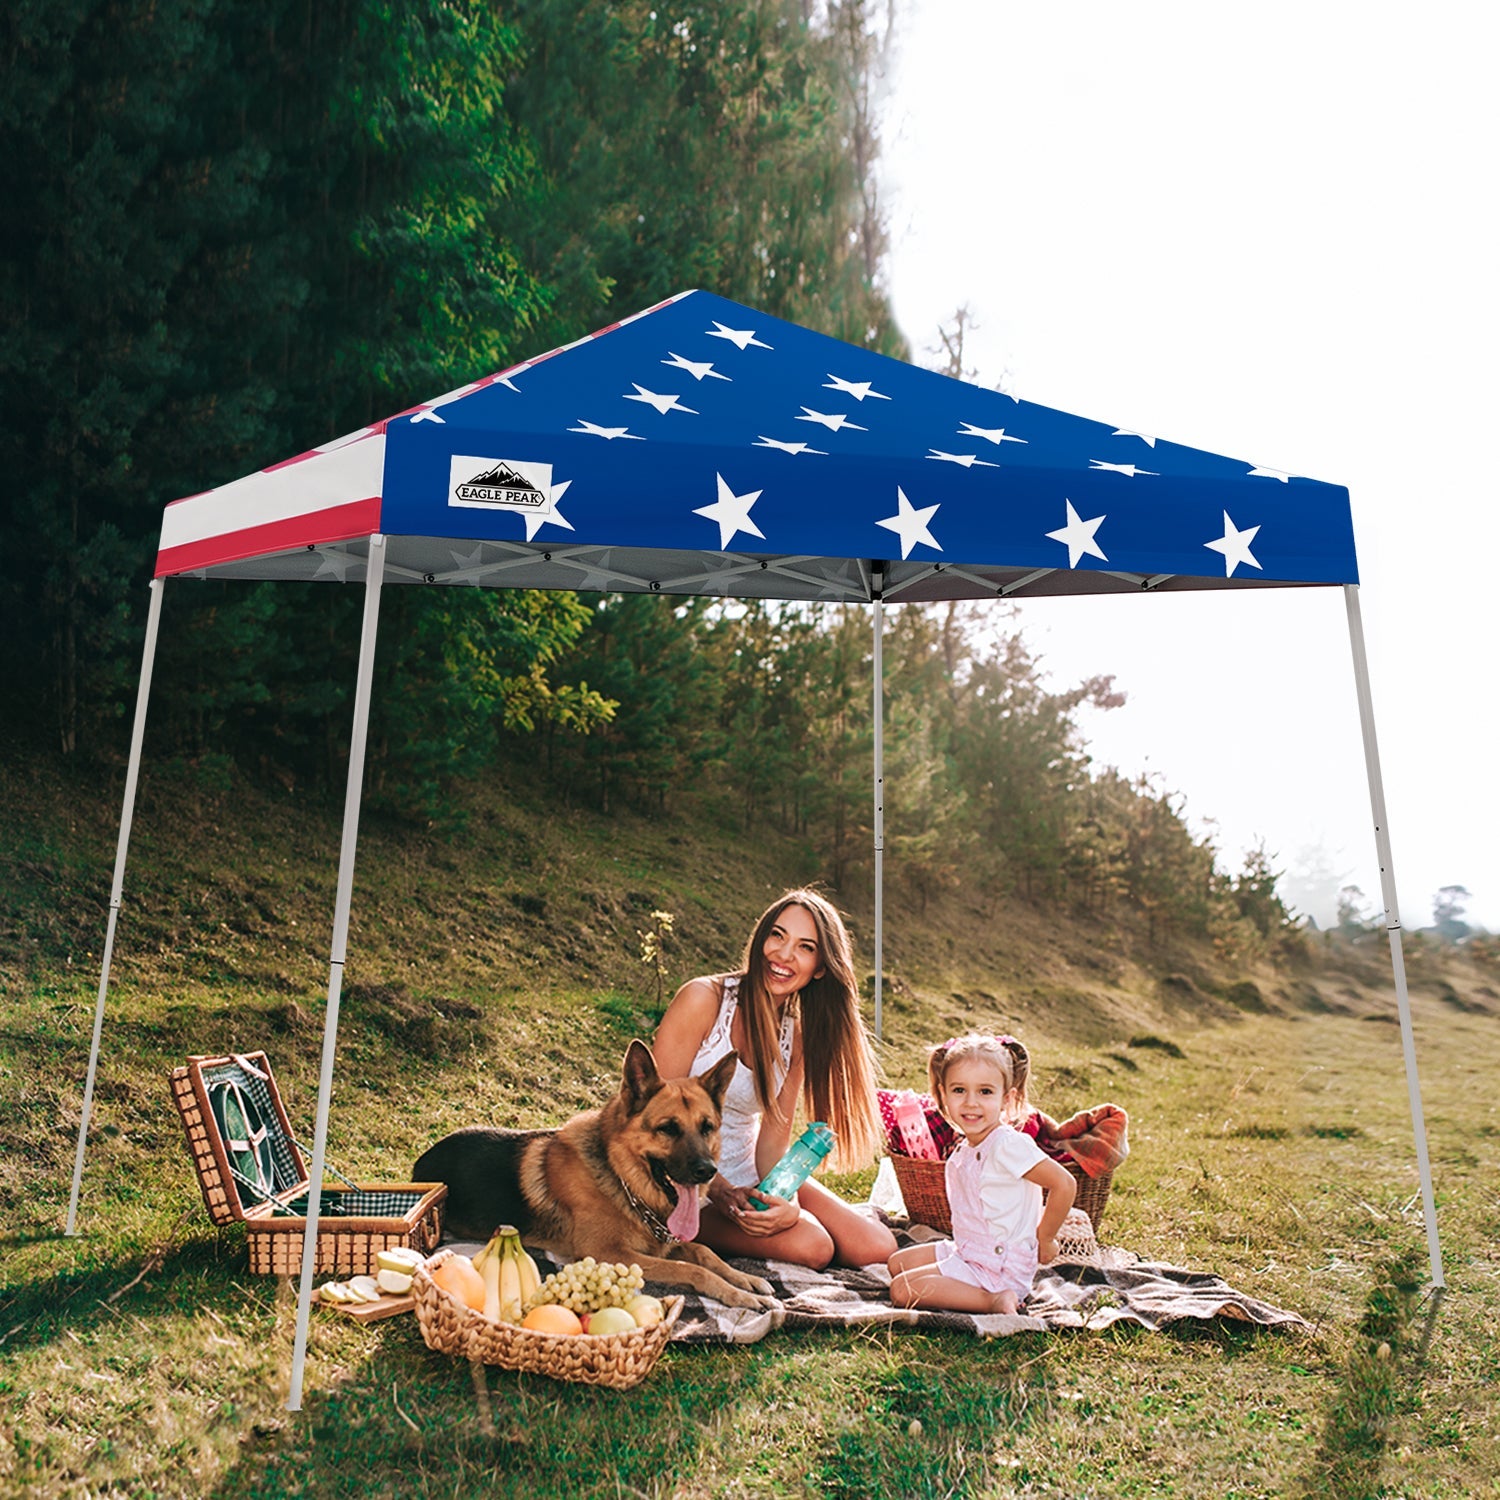 EAGLE PEAK 10' x 10' Slant Leg Pop-up Canopy Tent Easy One Person Setup Instant Outdoor Canopy Folding Shelter with 64 Square Feet of Shade (American Flag)